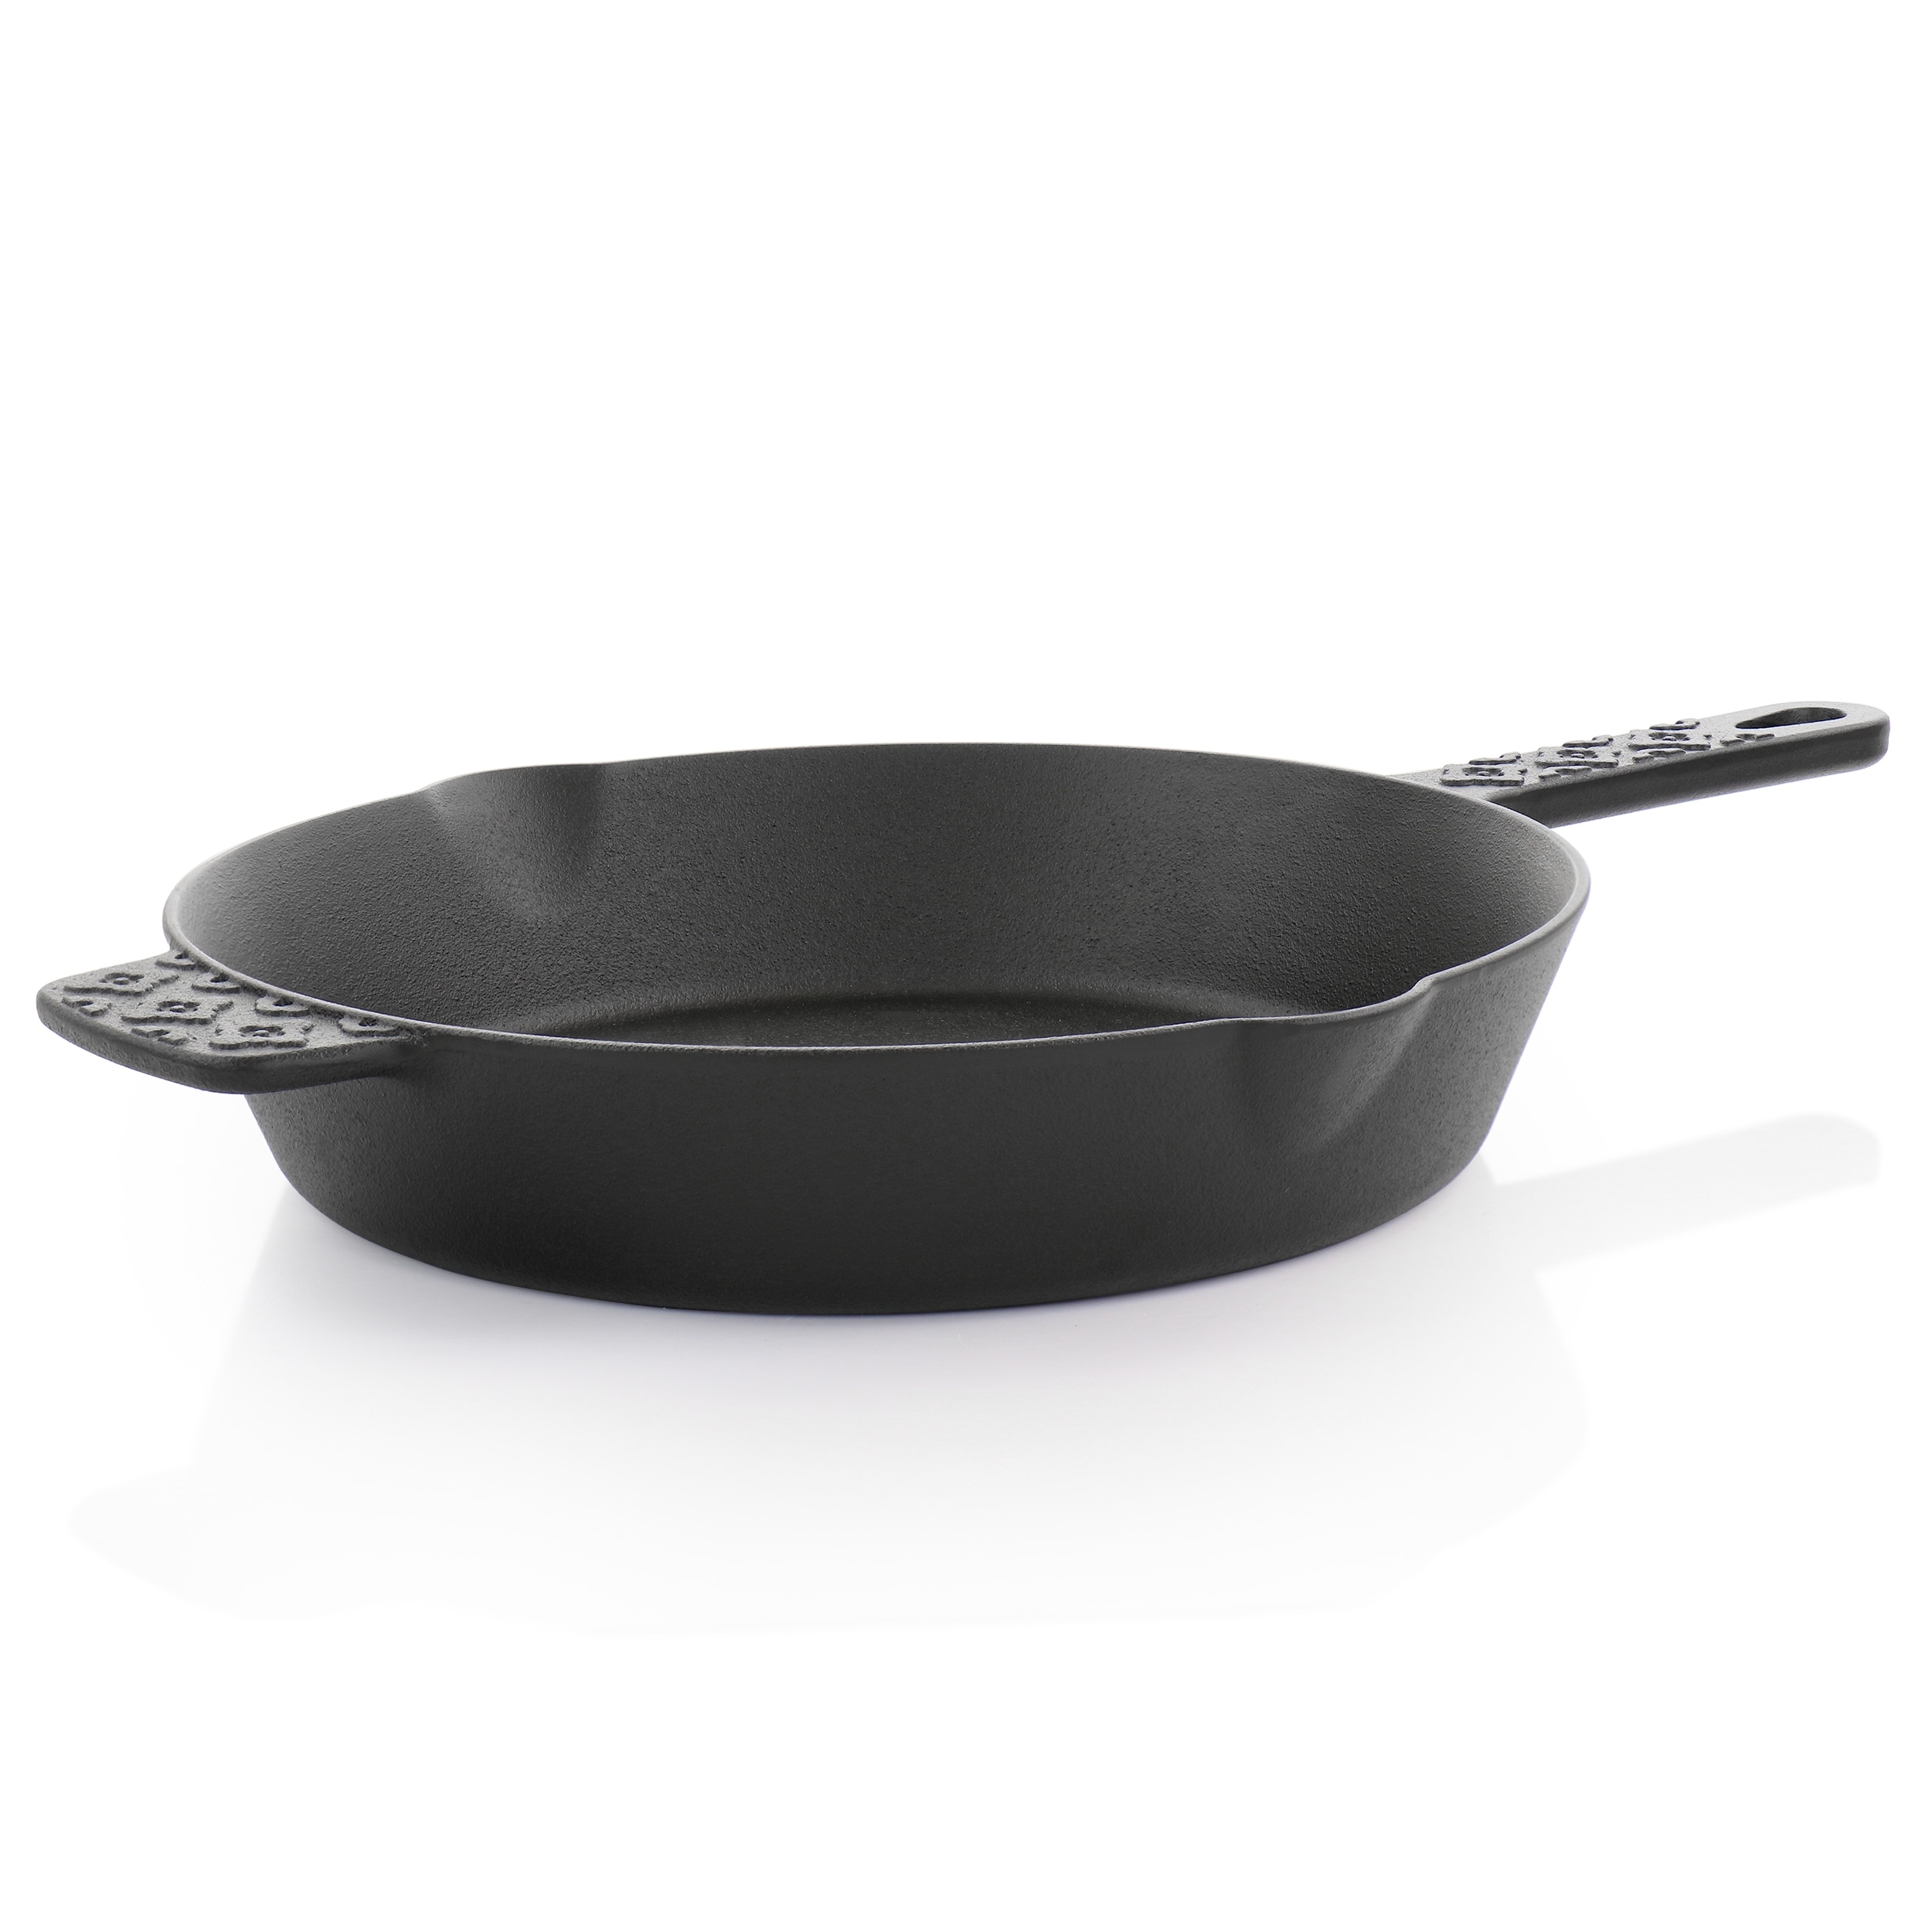 Spice by Tia Mowry Savory Saffron Preseasoned 10 In Cast Iron Skillet - On  Sale - Bed Bath & Beyond - 35976788